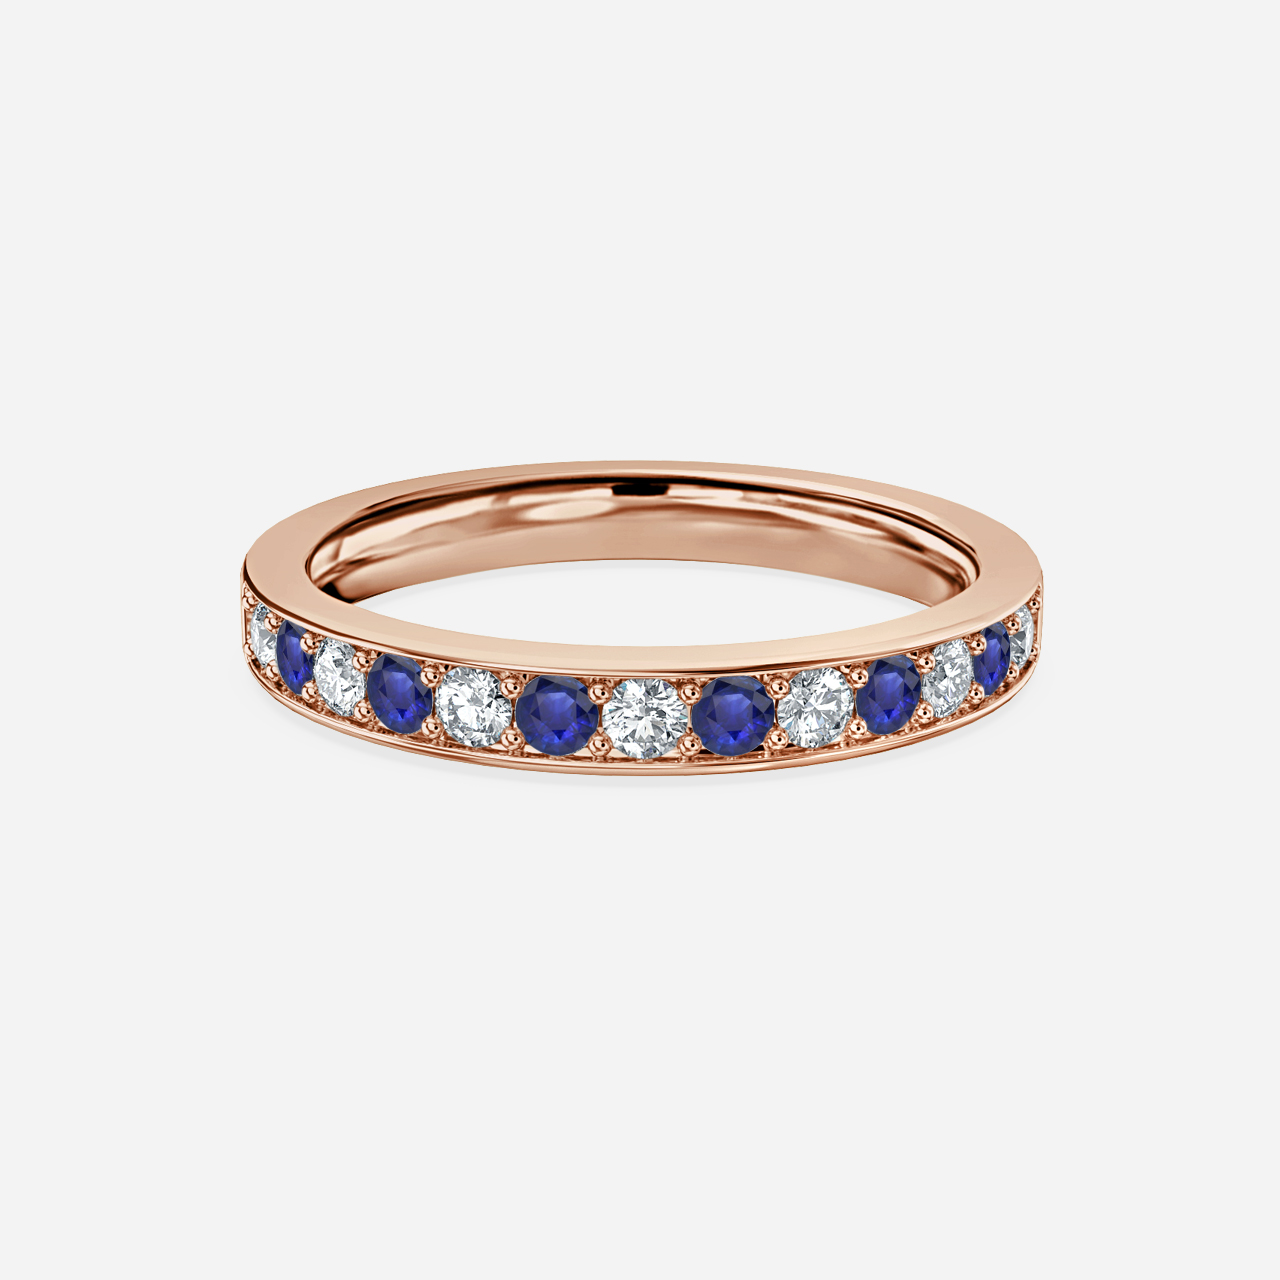 Blue Sapphire And Diamond Wedding Ring Grain Set In Rose Gold